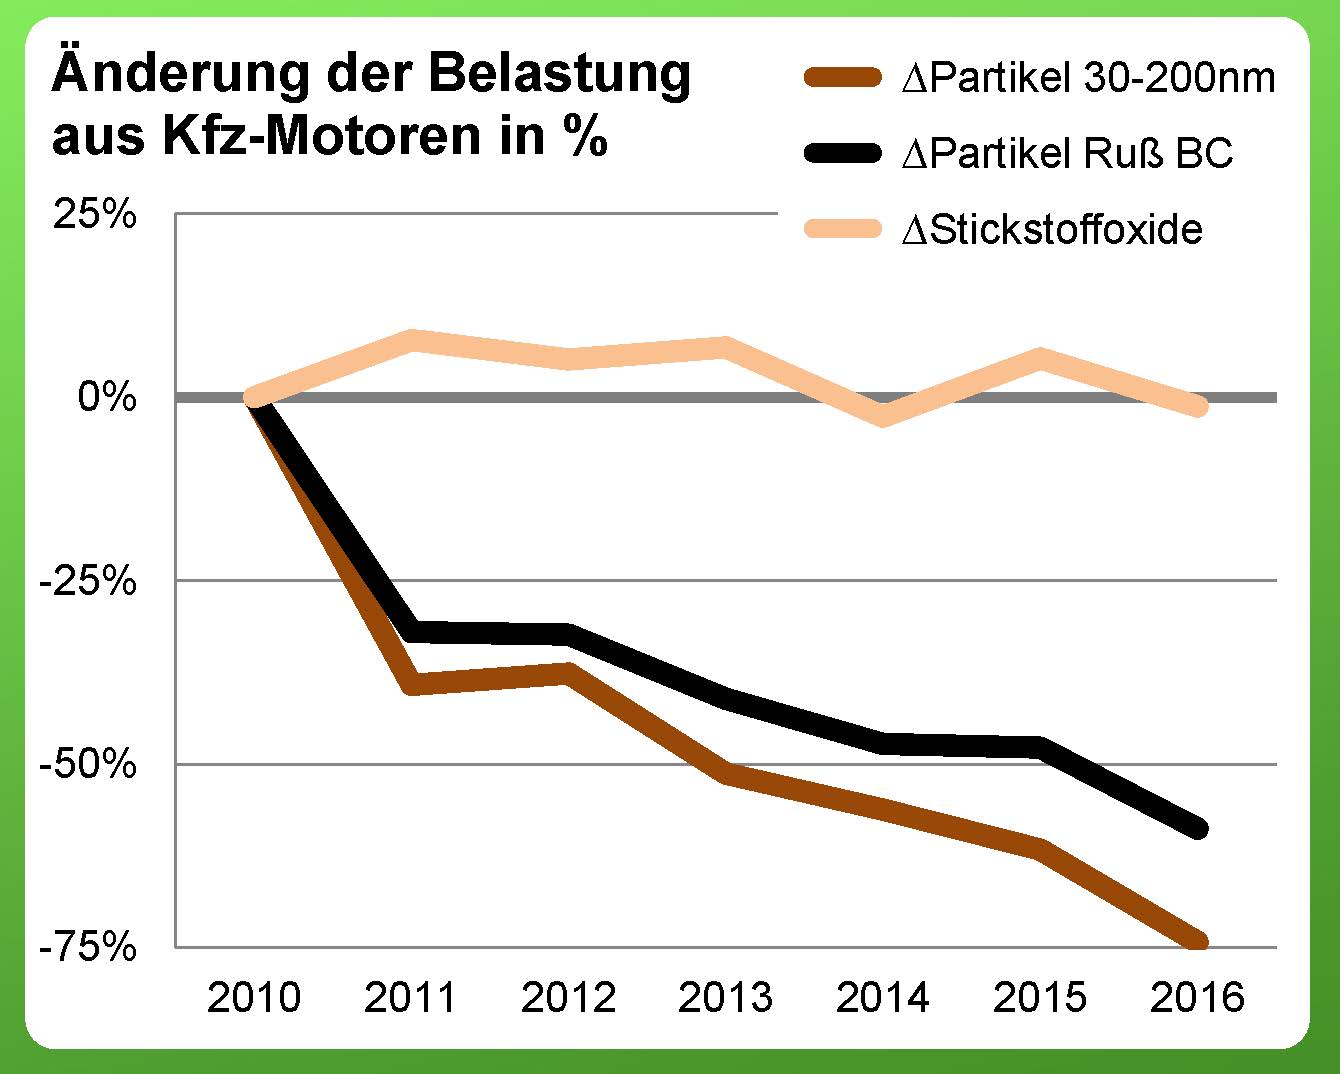 The study by LfULG and TROPOS shows that the concentrations of the carcinogenic combustion particles of diesel vehicles have been reduced by more than half. In contrast, the pollution with nitrogen oxides has remained nearly constant despite the modern diesel vehicles. Source: Leipzig Environmental Zone - final report, LfULG/TROPOS